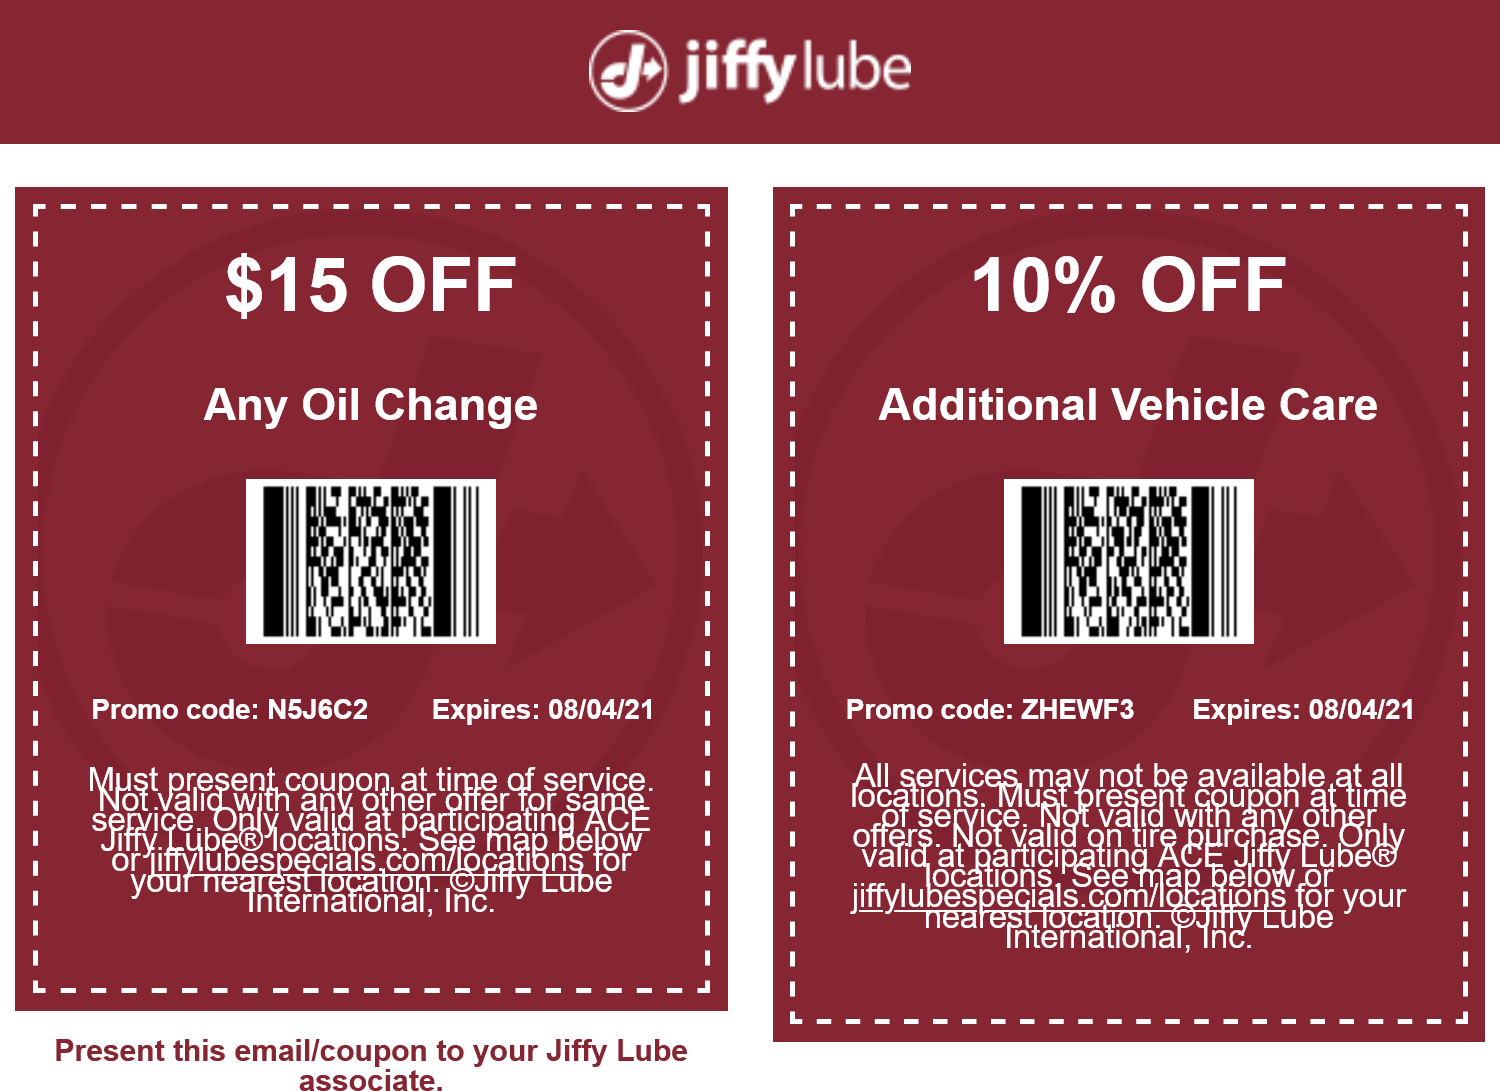 $15 off any oil change at Jiffy Lube #jiffylube The Coupons App®